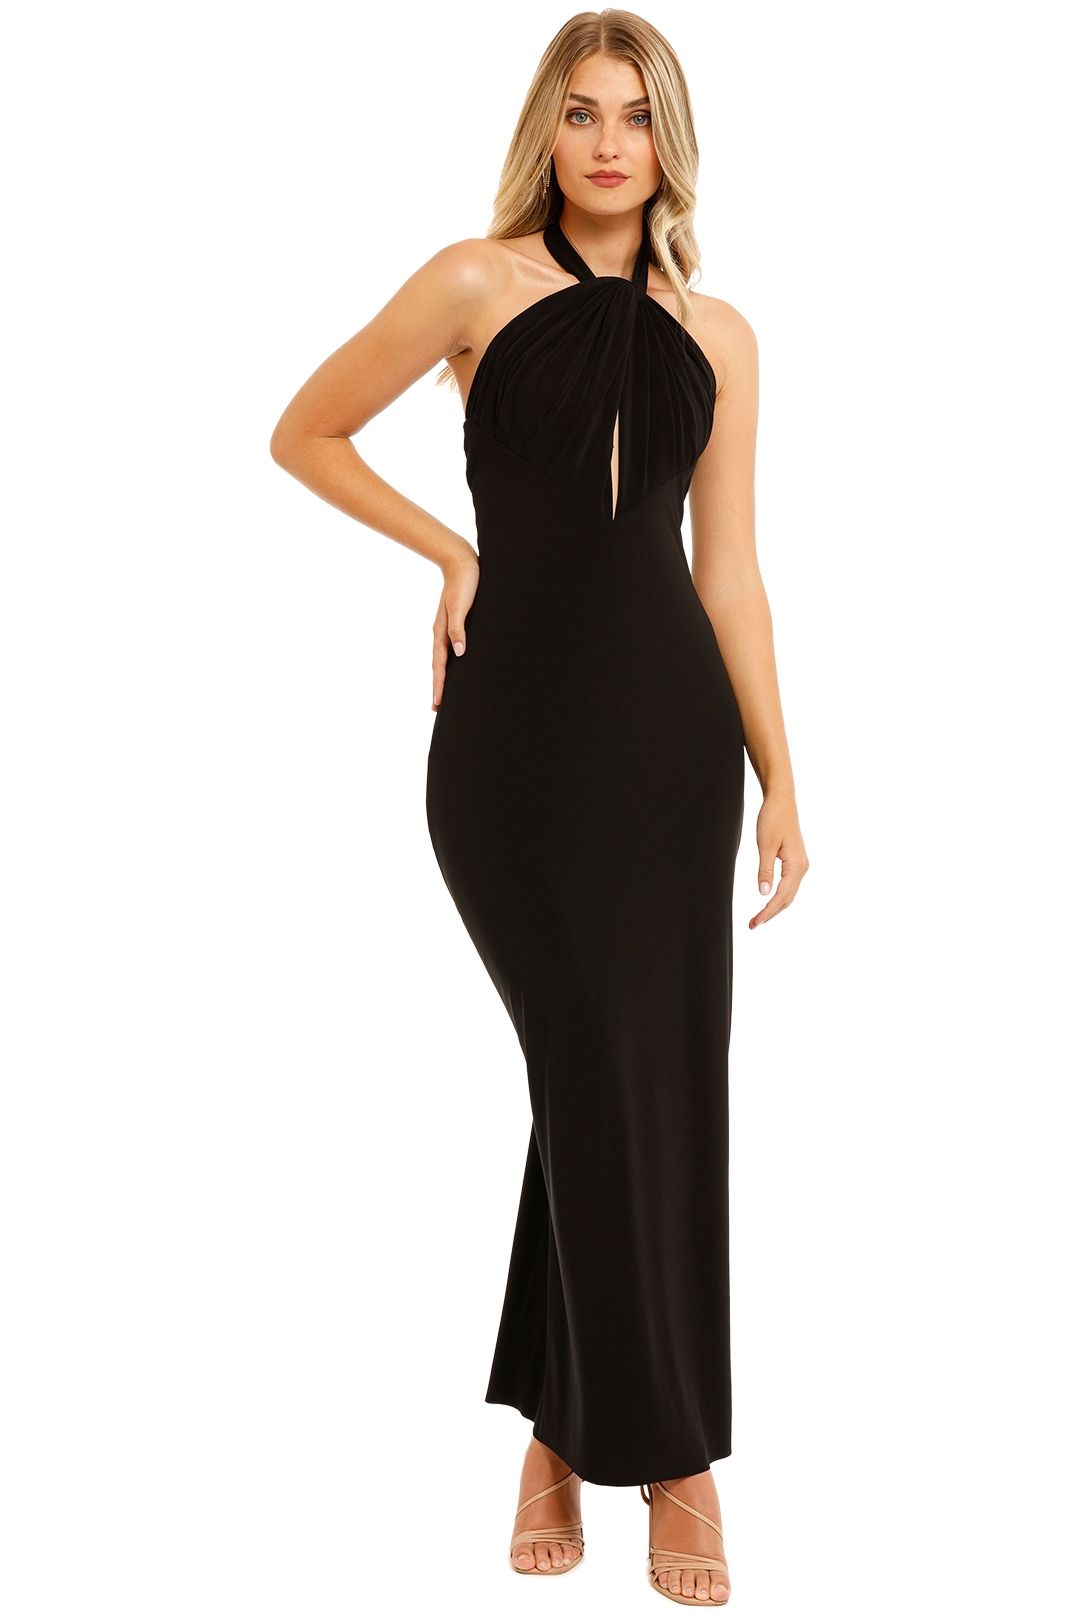 Hire Slip Knot Gown in Black | By Johnny | GlamCorner